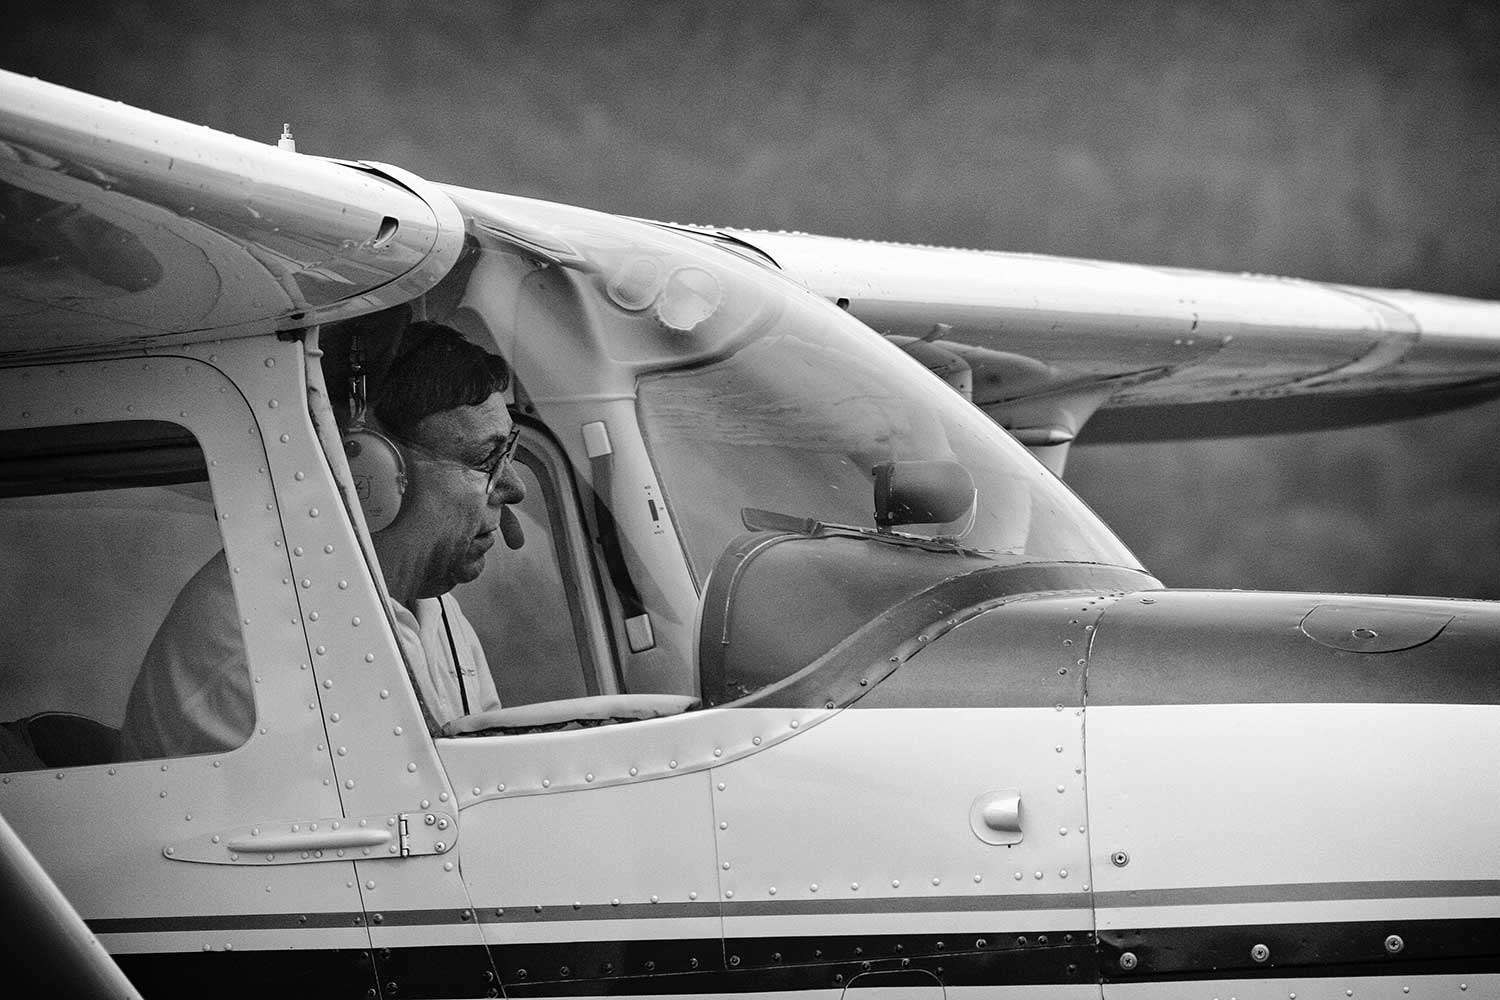 When he’s not flying business jets, Bert Loupe can usually be found managing Campbell County airport. This quiet Friday afternoon provides him the opportunity to roll one of the planes onto the tarmac for a brief flight beneath the grey sky. photos by Jamie Wilson - 2007